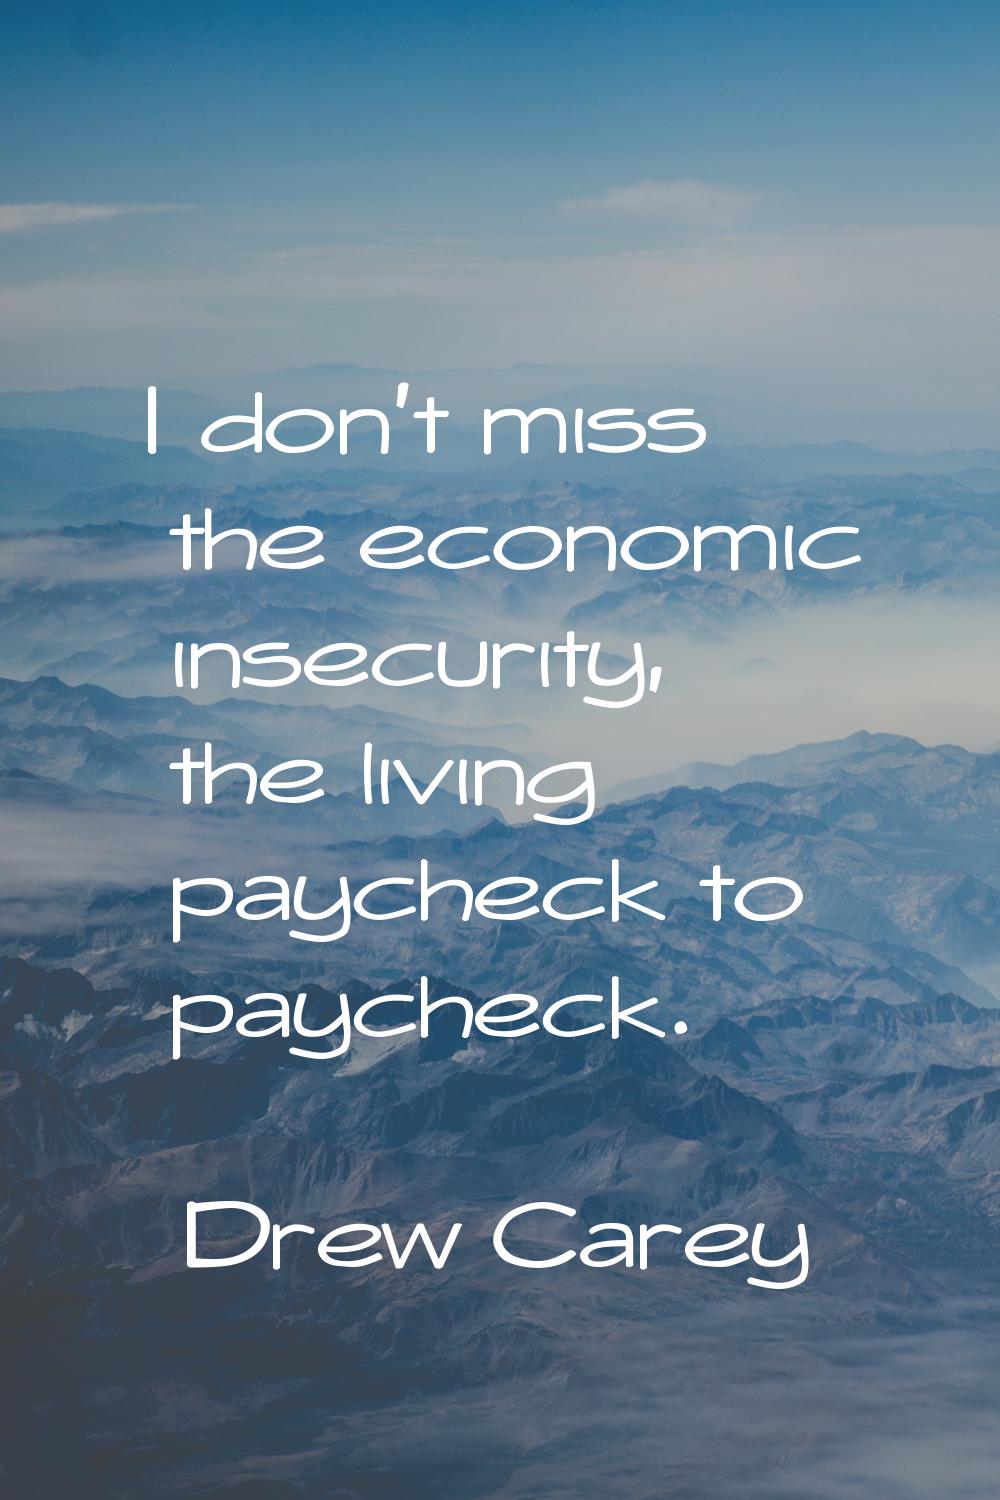 I don't miss the economic insecurity, the living paycheck to paycheck.